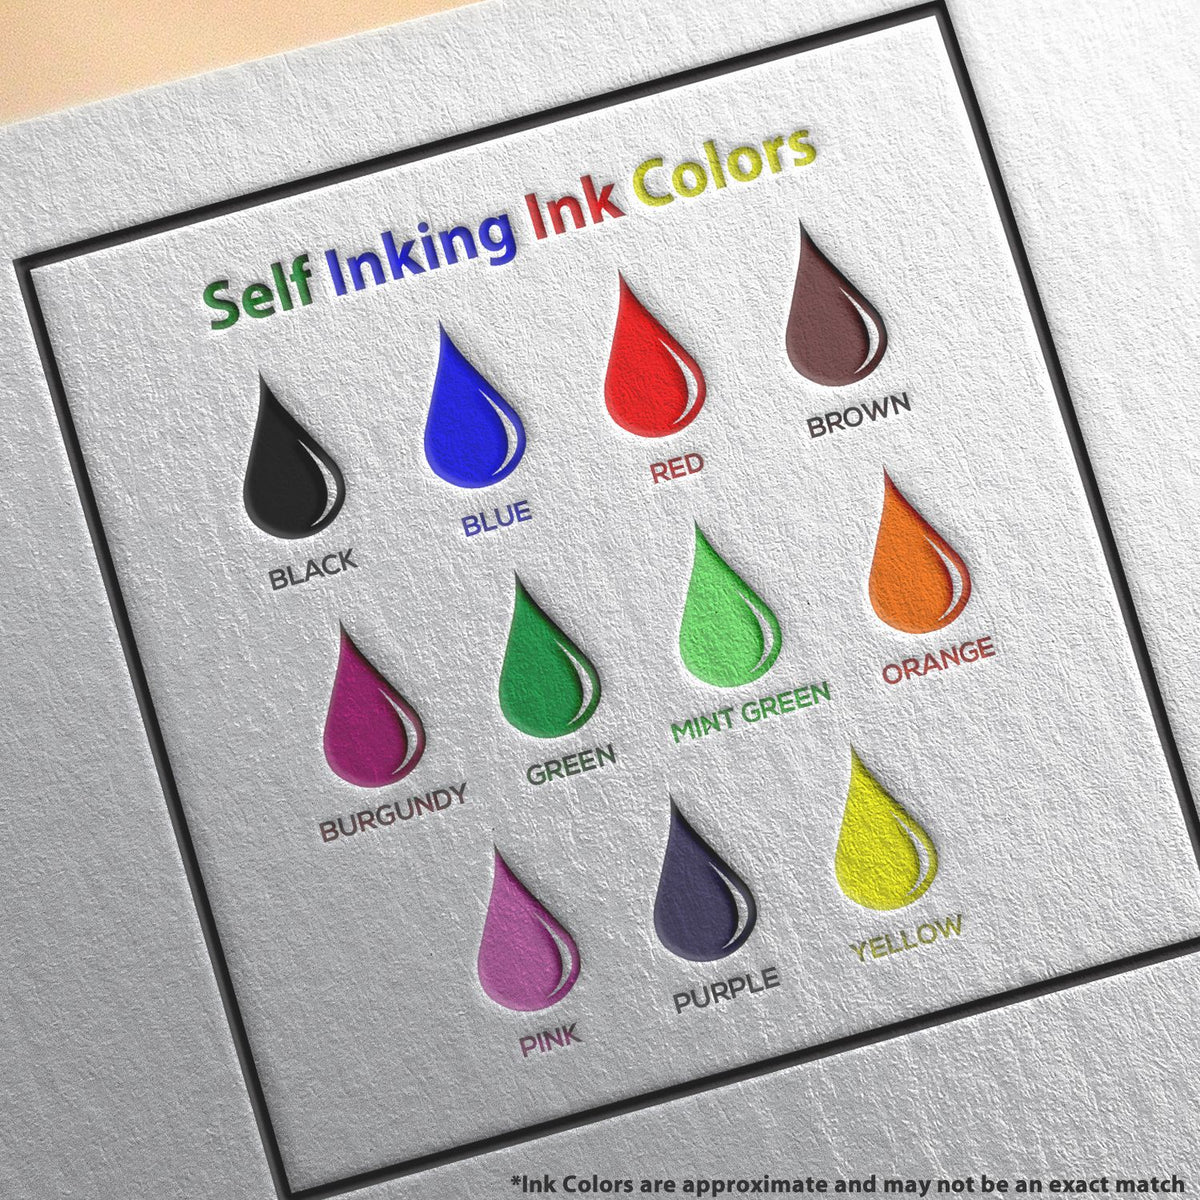 A picture showing the different ink colors or hues available for the Self-Inking Oklahoma Landscape Architect Stamp product.